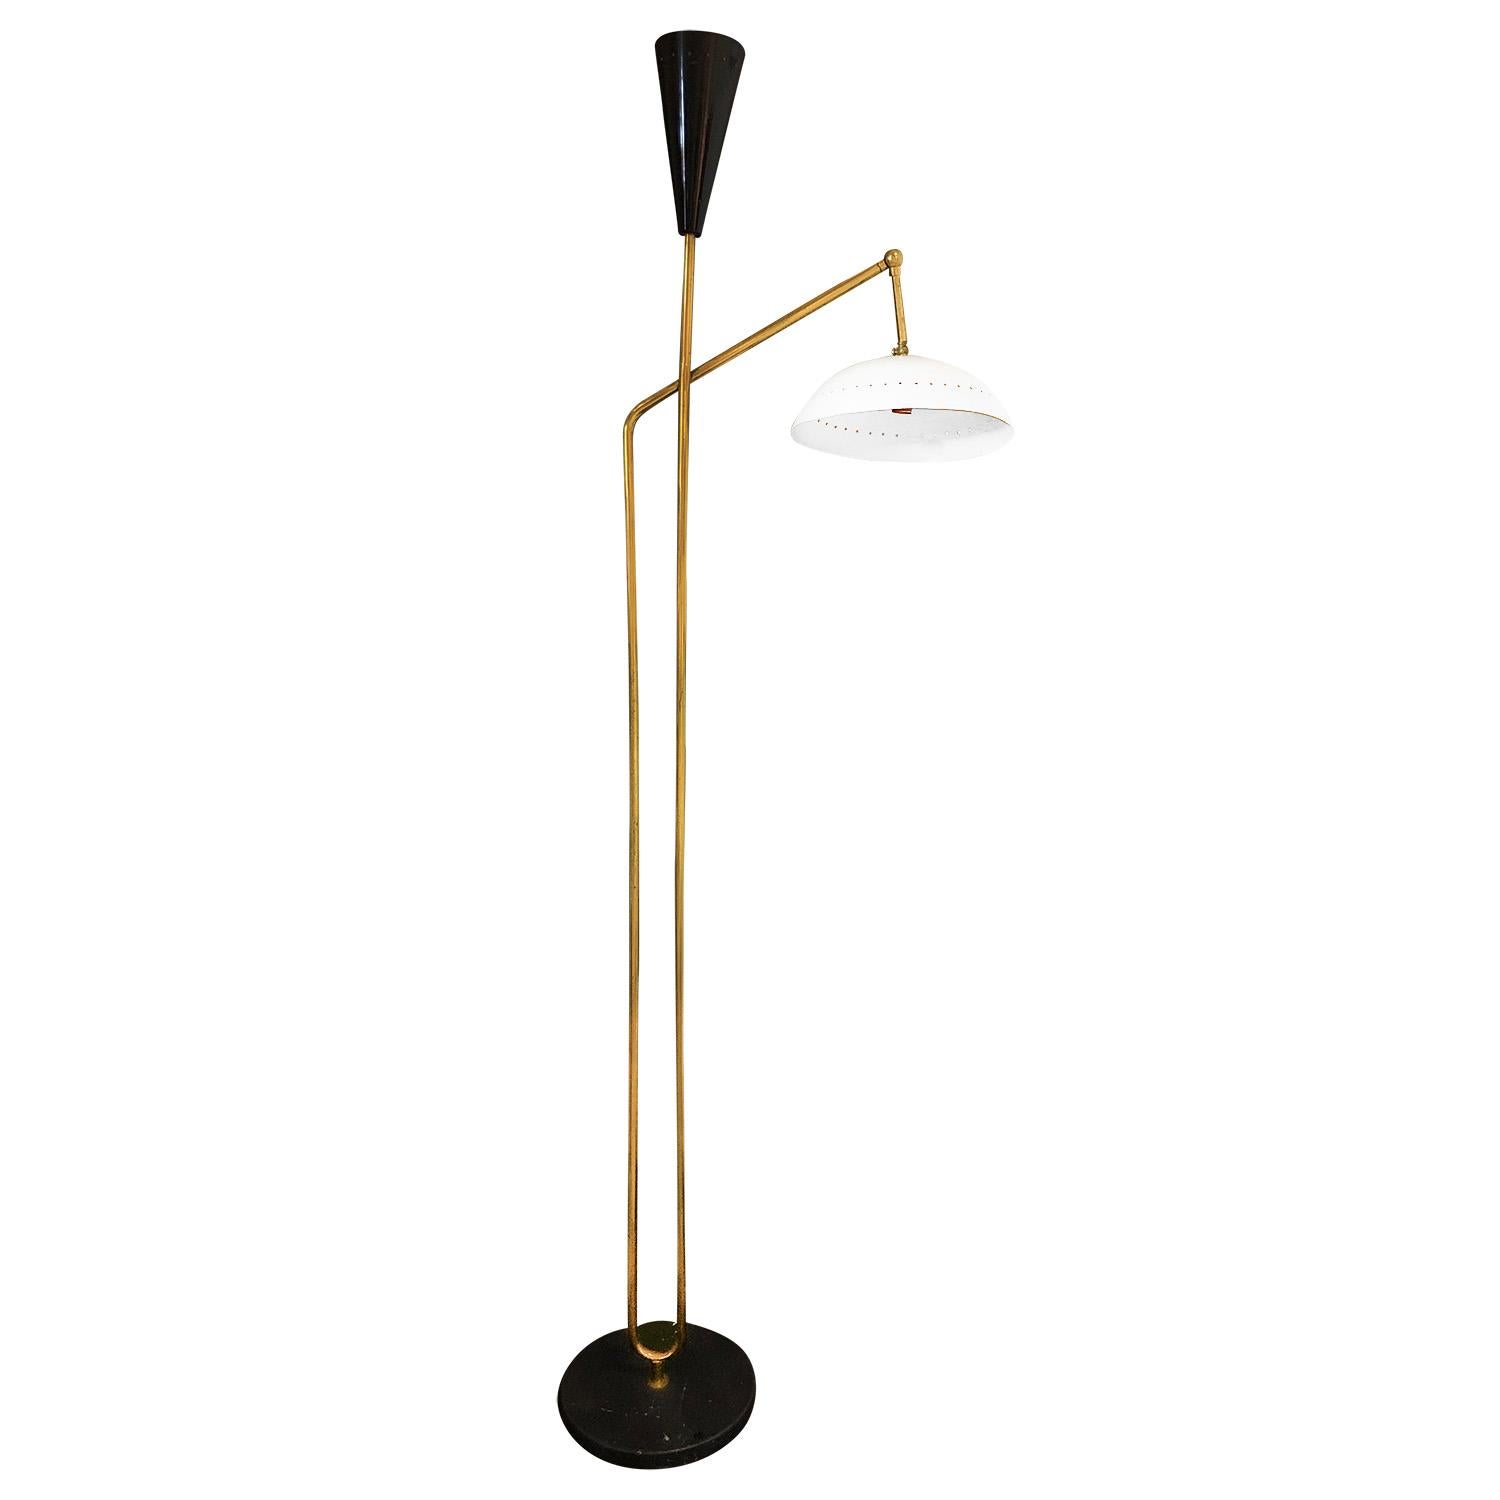 A vintage Mid-Century modern Italian large reading floor lamp made of brass and white, black painted metal and aluminum, standing on a round grey, white marble base. Produced and designed by Gilardi & Barzaghi, in good condition. This lamp consists